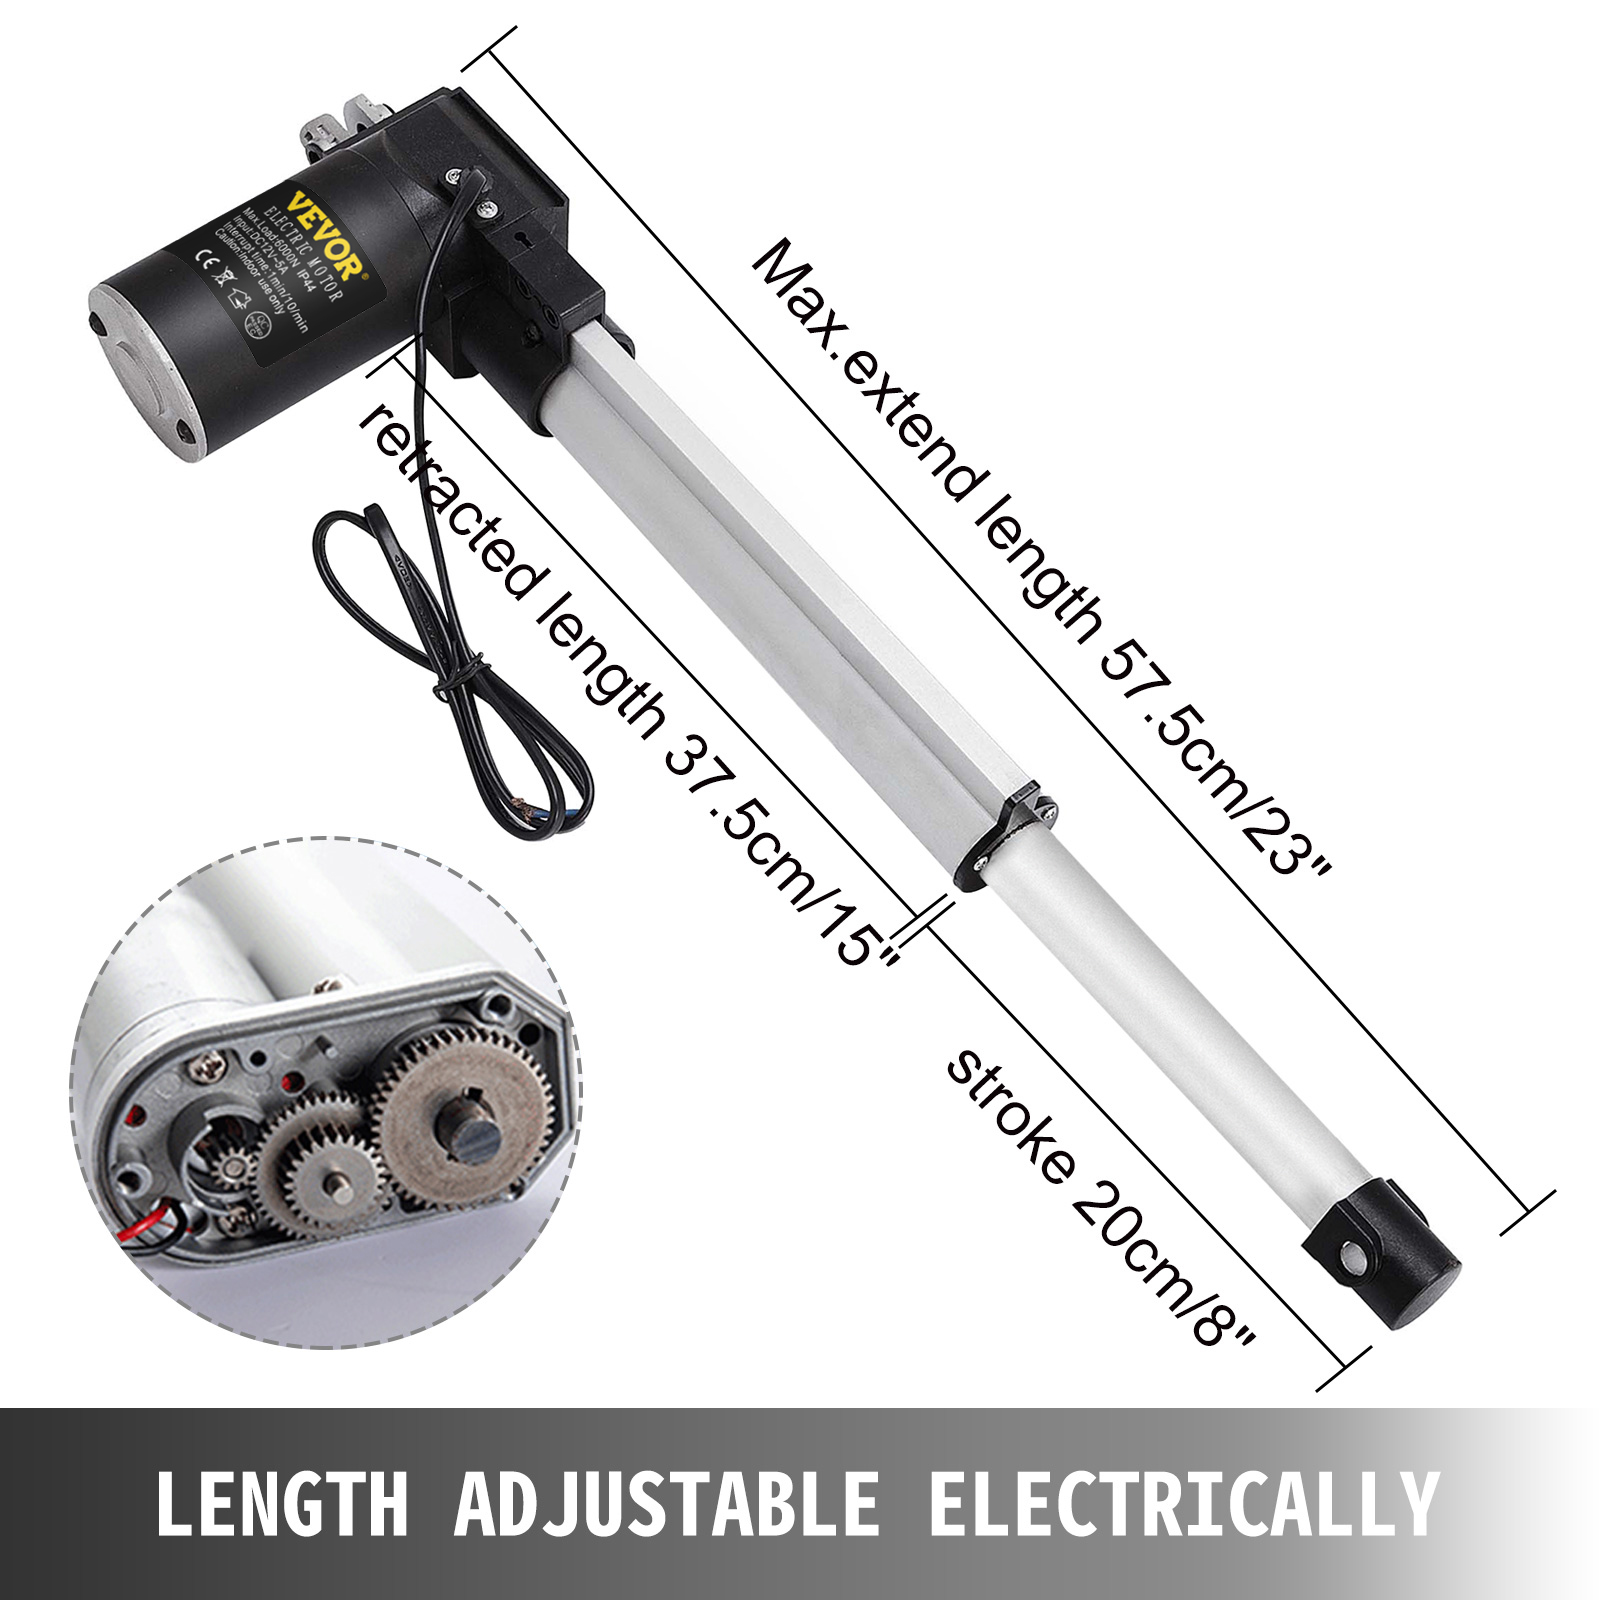 Details about   DC 12V Linear Actuator 1320LB/6000N 6"-20" for Auto Lift Heavy Duty Medical New 